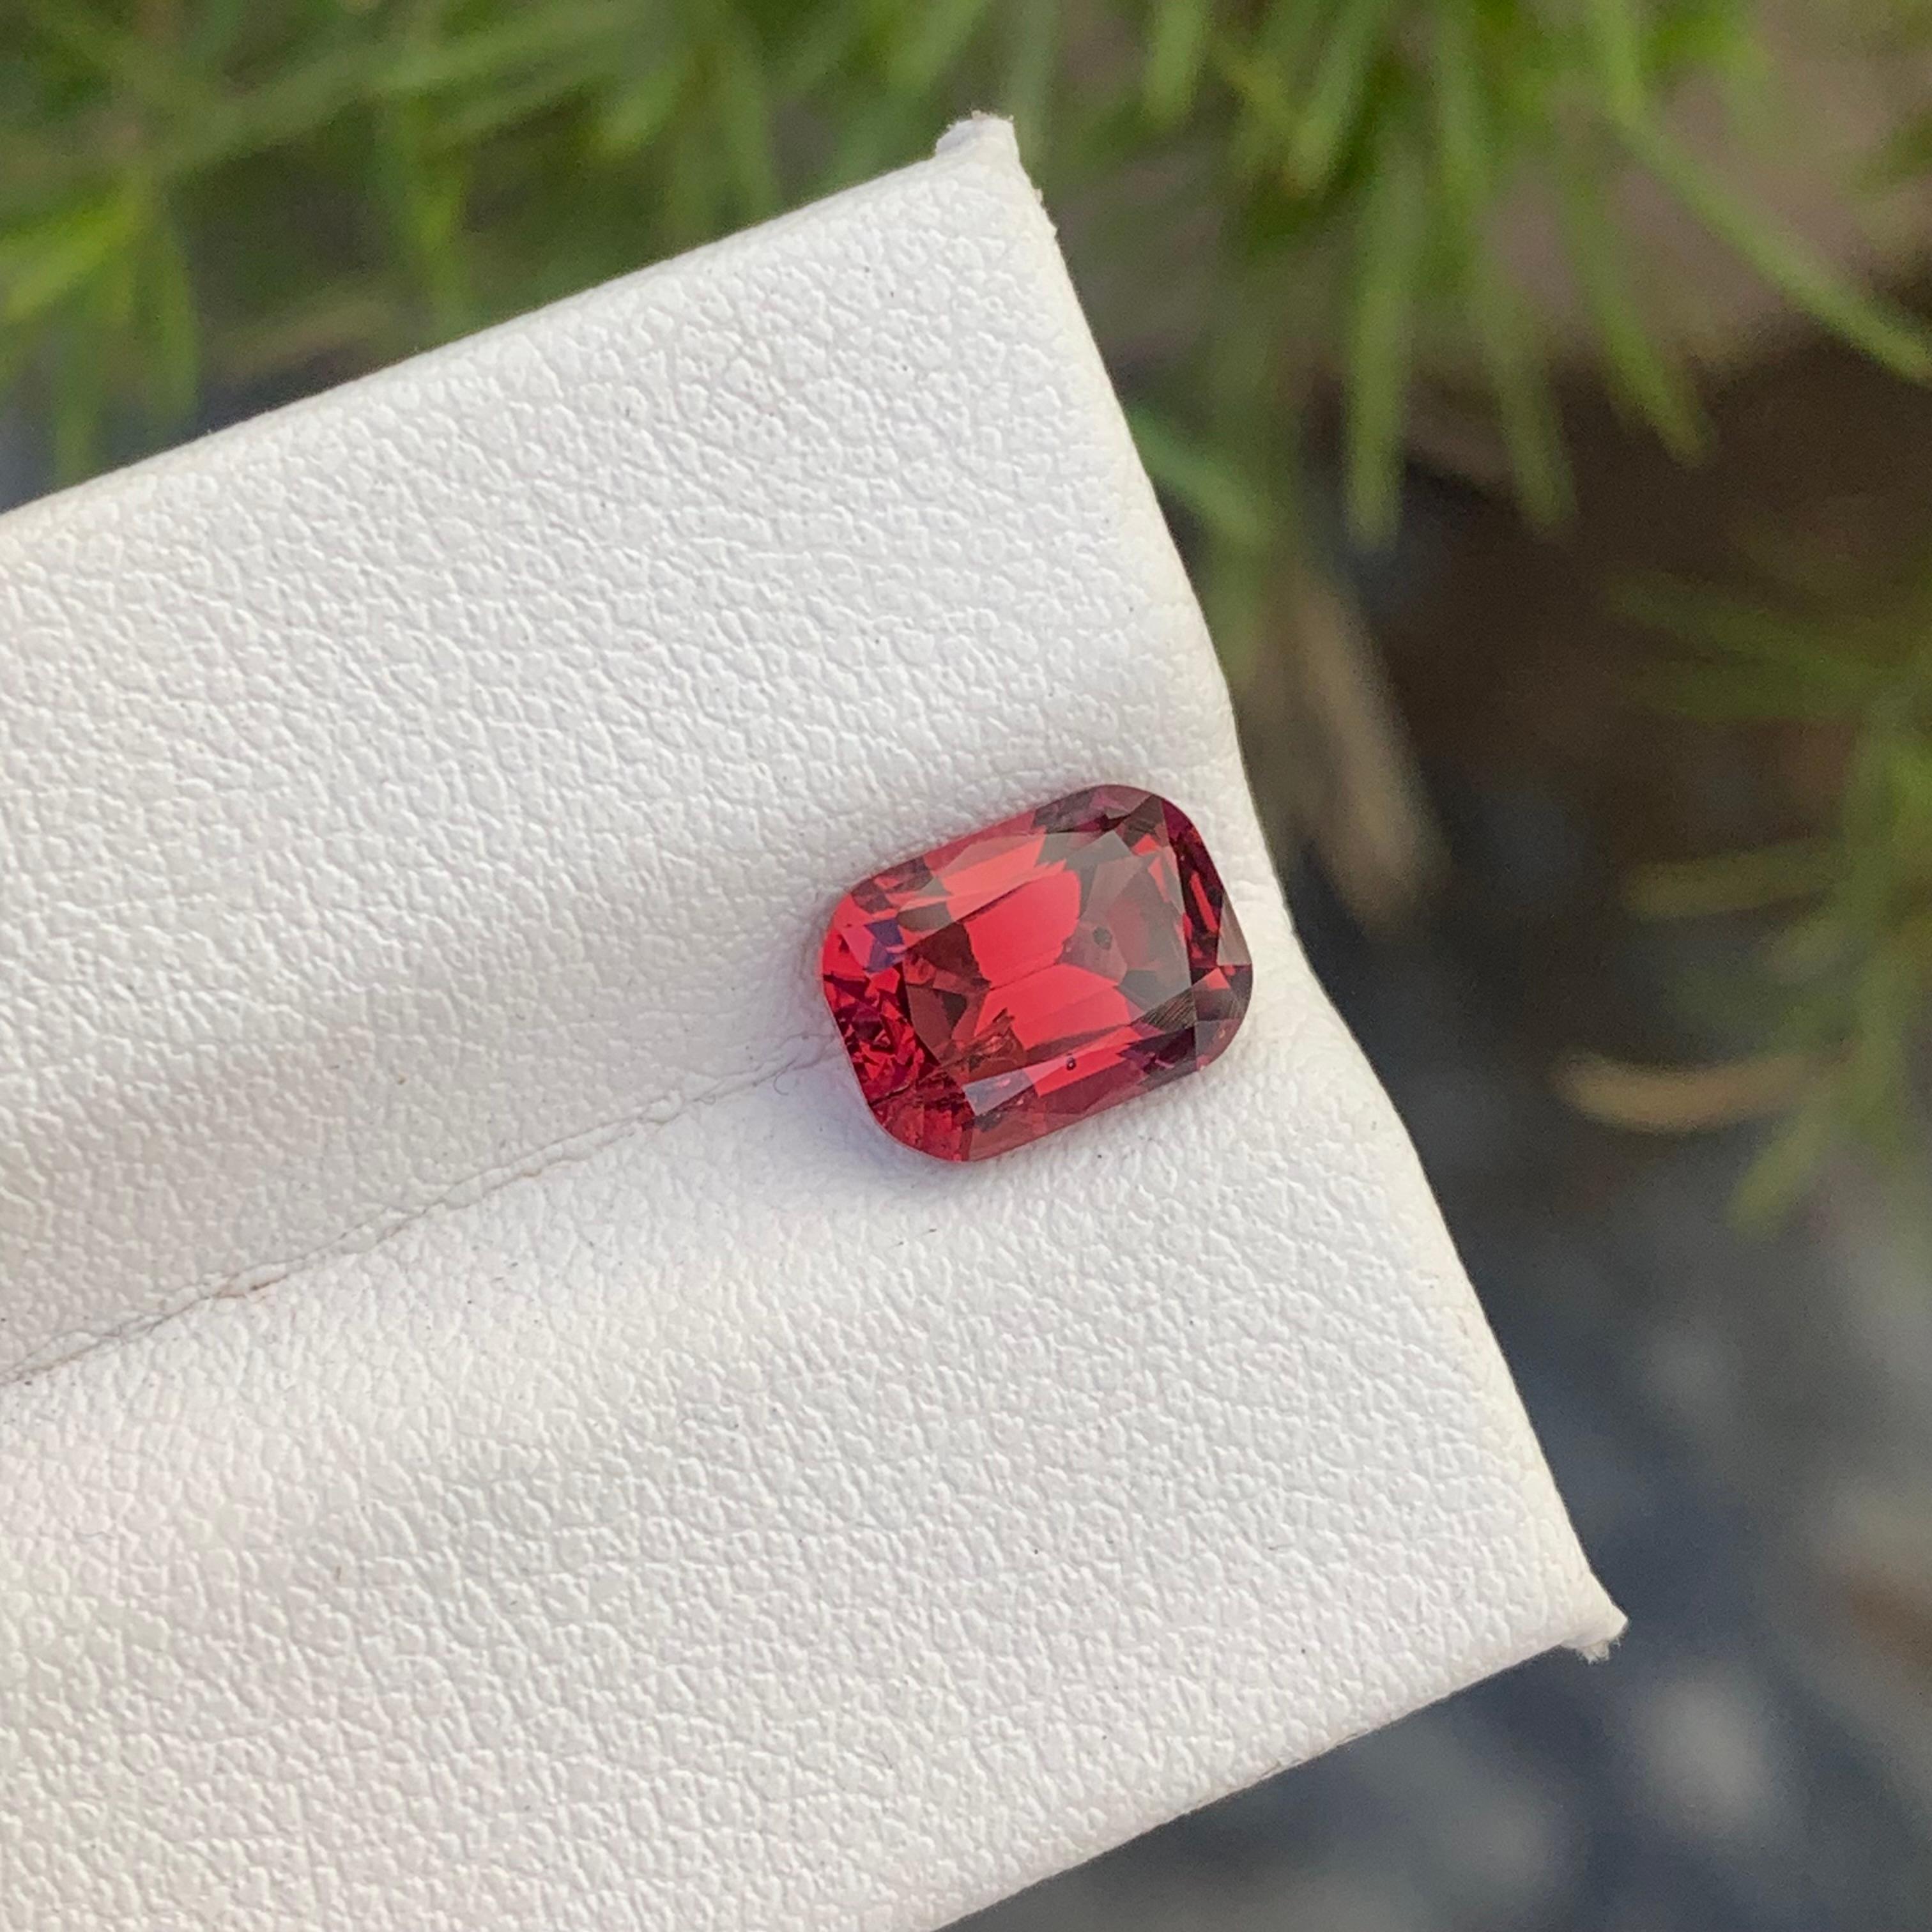 Cushion Cut Gorgeous Natural Loose Red Rhodolite Garnet Gemstone 2.45 Carat with SI Clarity For Sale